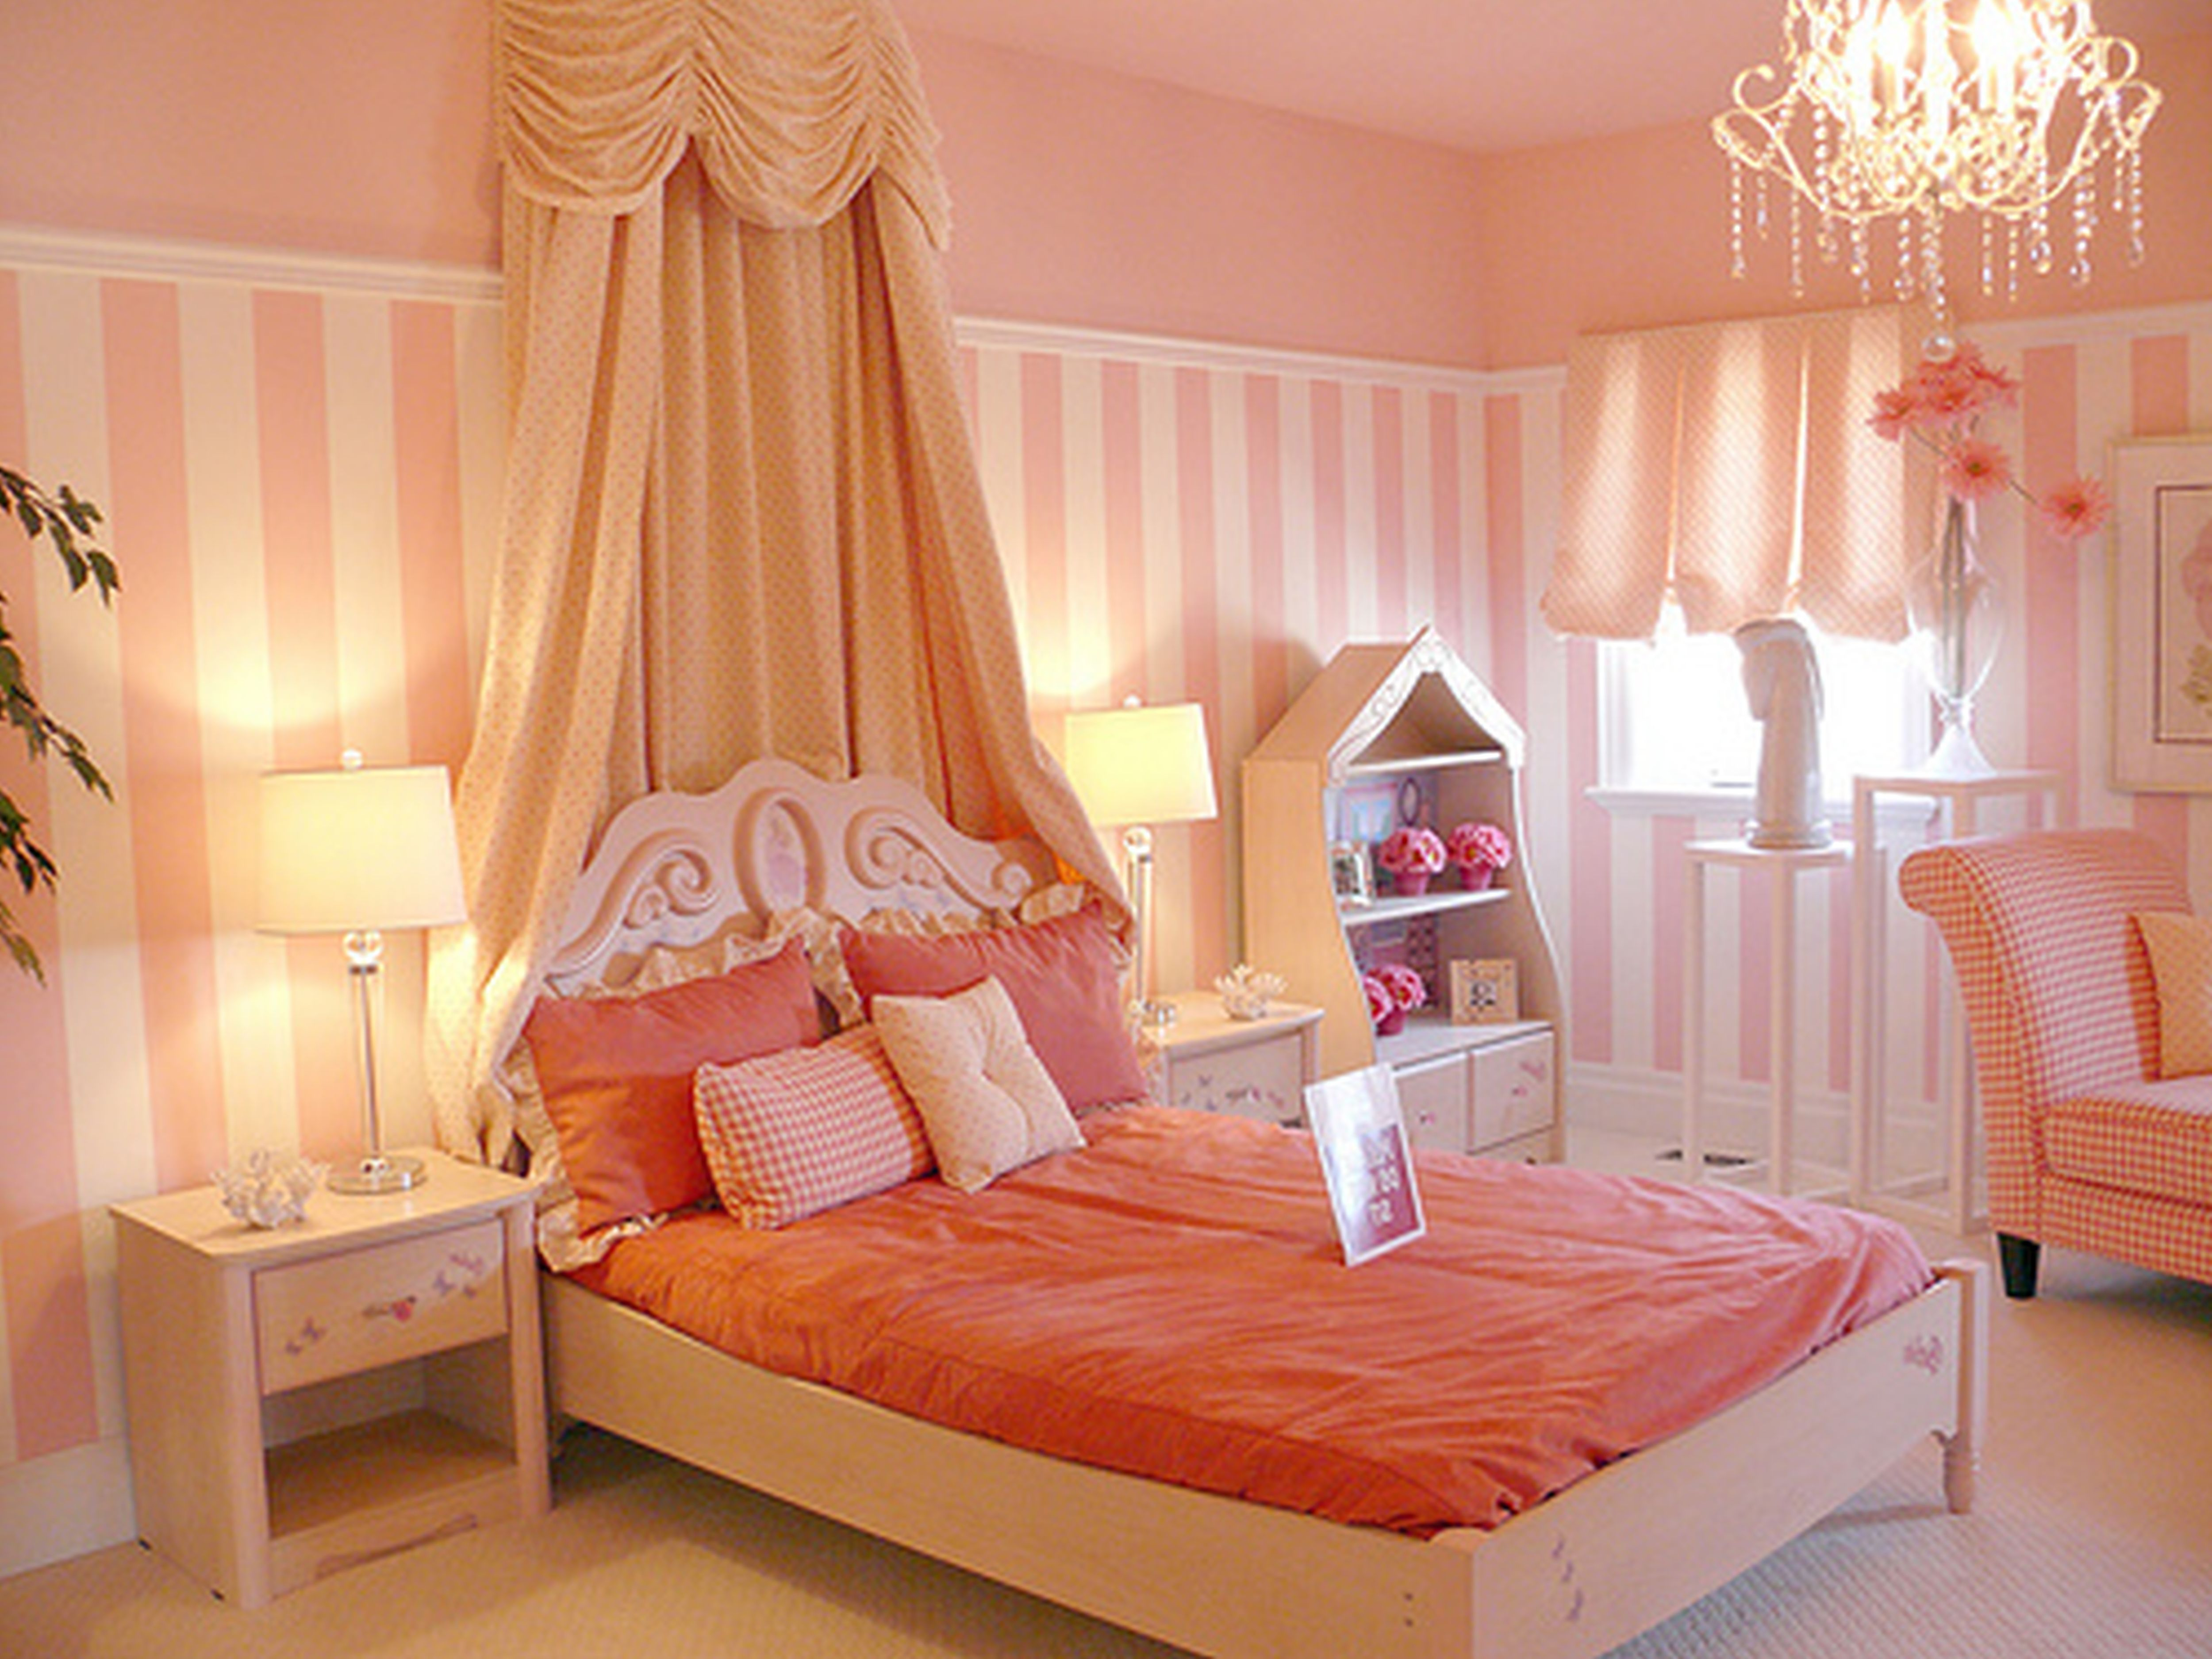 Beauty Teenage Girl Room Colors Home Design Ideas Home Design within size 5000 X 3750